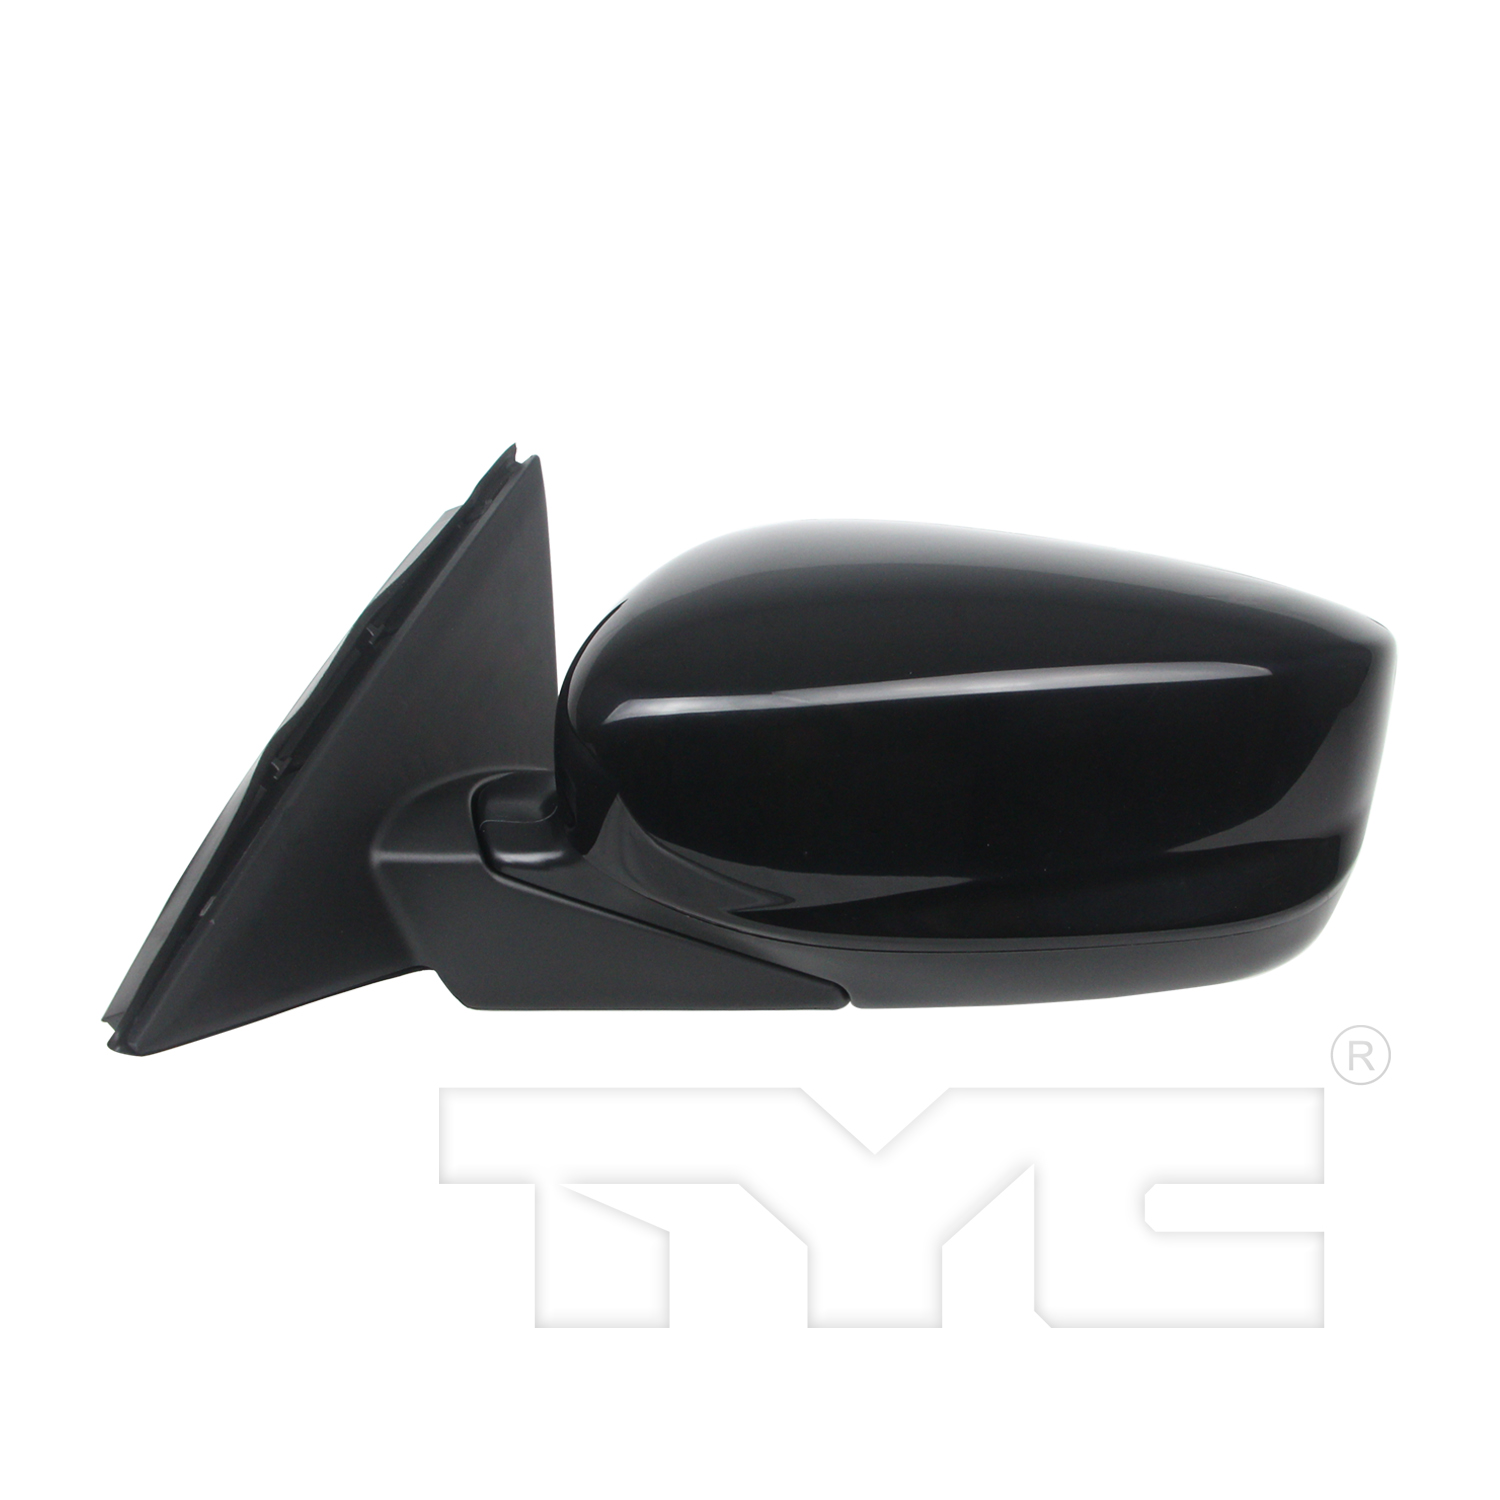 Aftermarket MIRRORS for HONDA - ACCORD, ACCORD,08-12,LT Mirror outside rear view